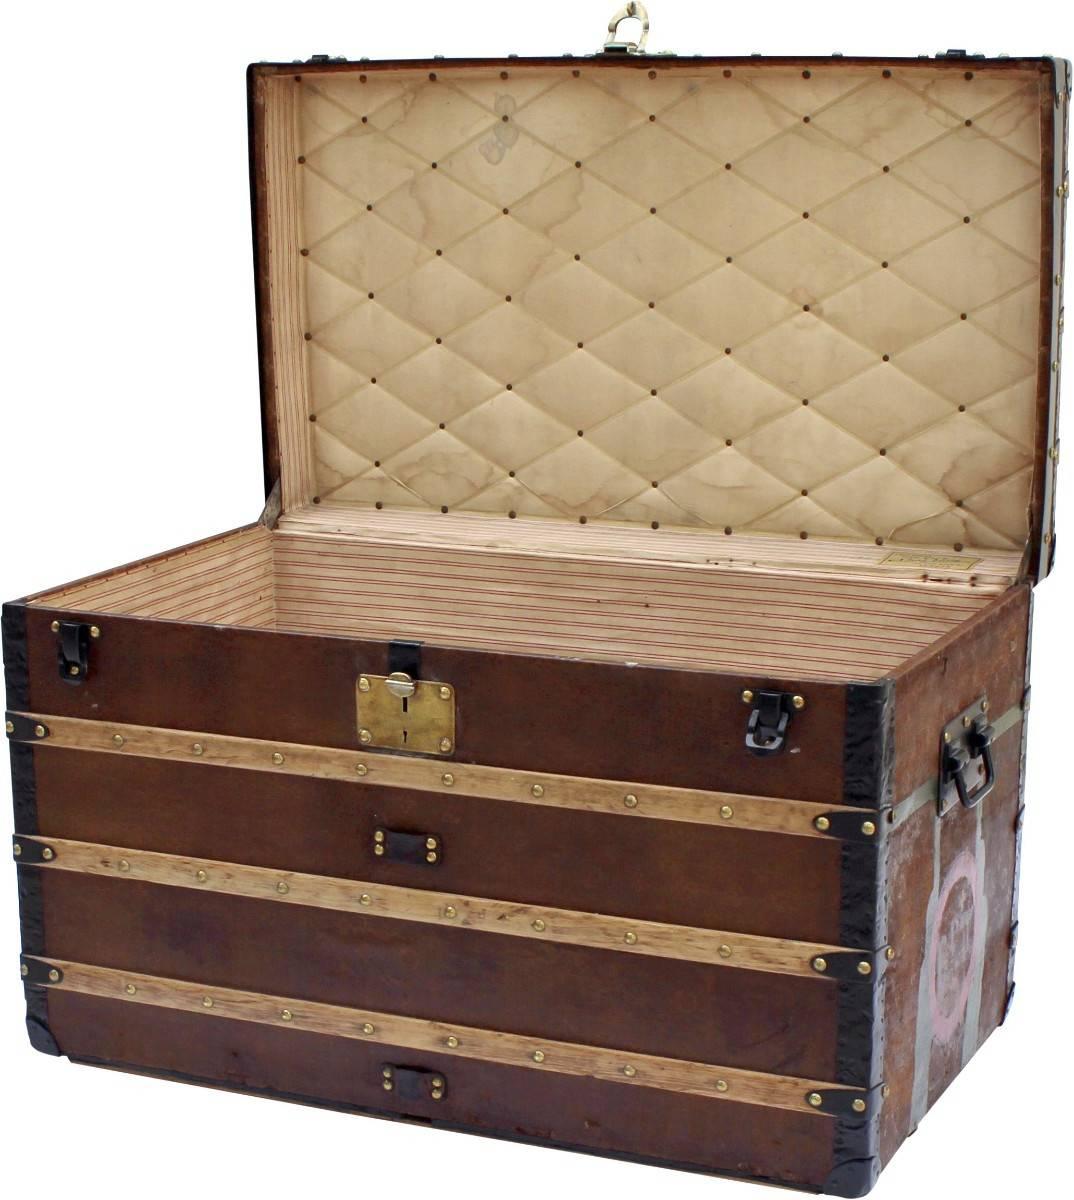 Dimensions: L 91cm x D 57cm x W 53cm

This courier trunk is a stunning addition to any home, circa 1930s. With striking black edges and light colored wood this trunk is finished with brass hardware.